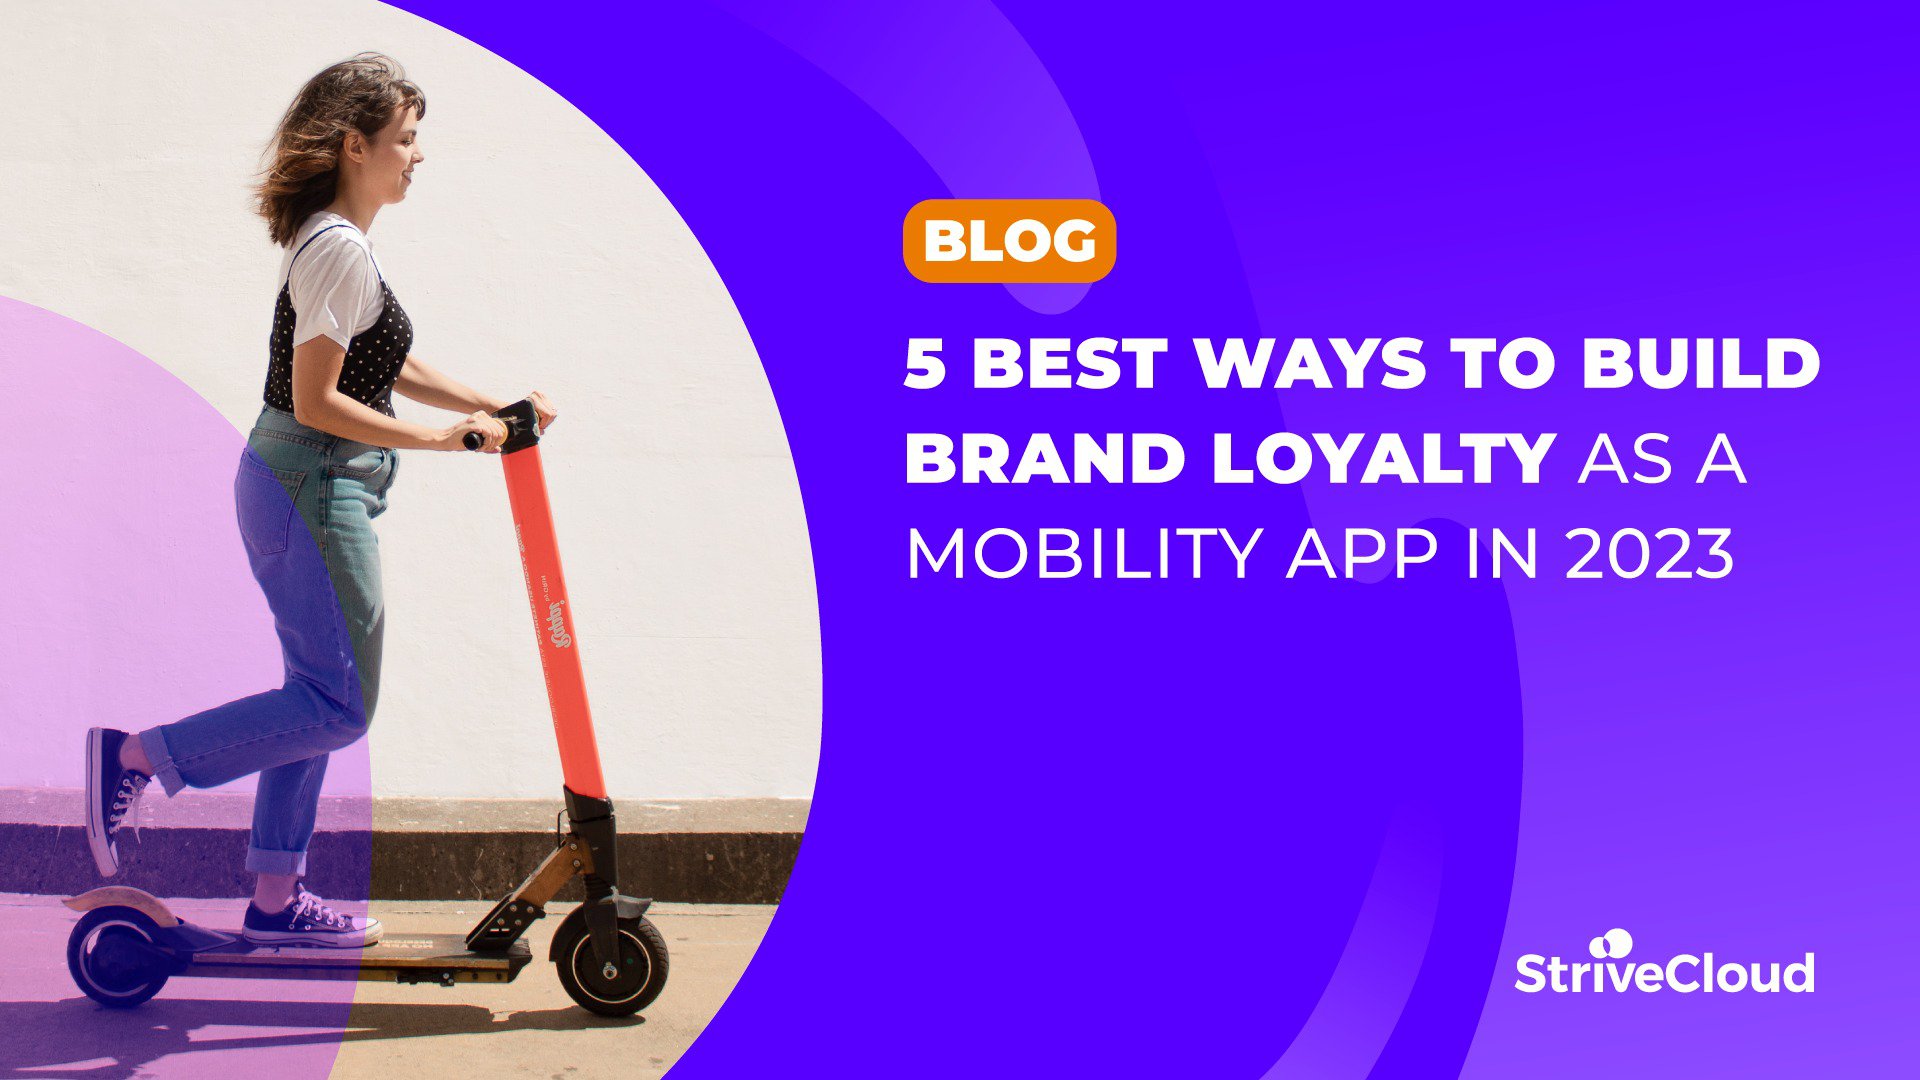 5 best ways to build brand loyalty as a mobility app in 2023 cover